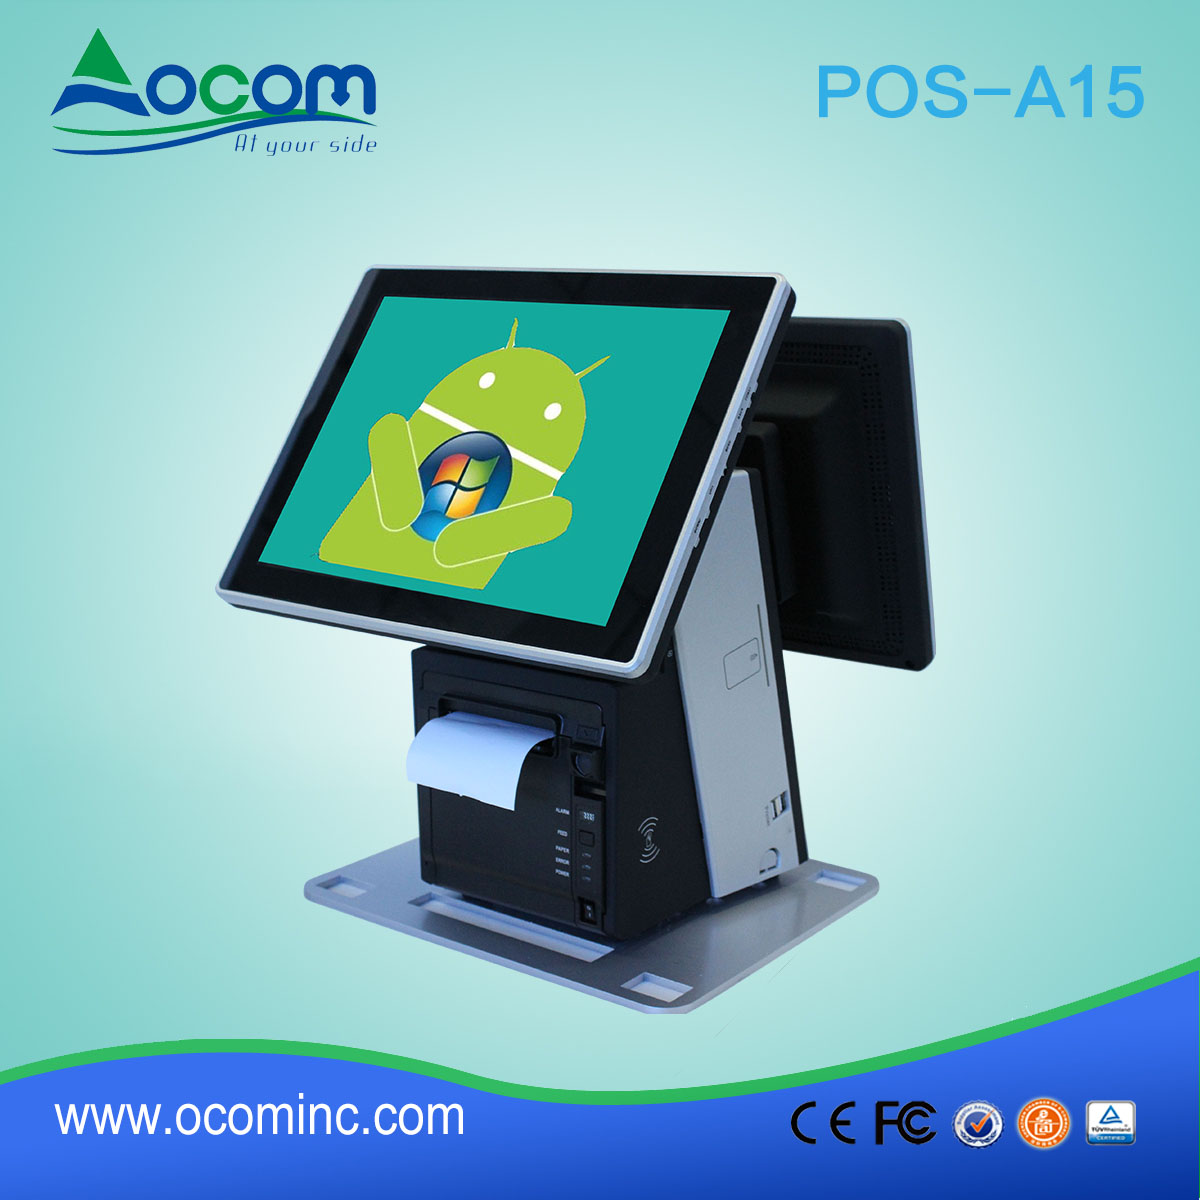 NEW Android or Windows retail touch screen China pos system price